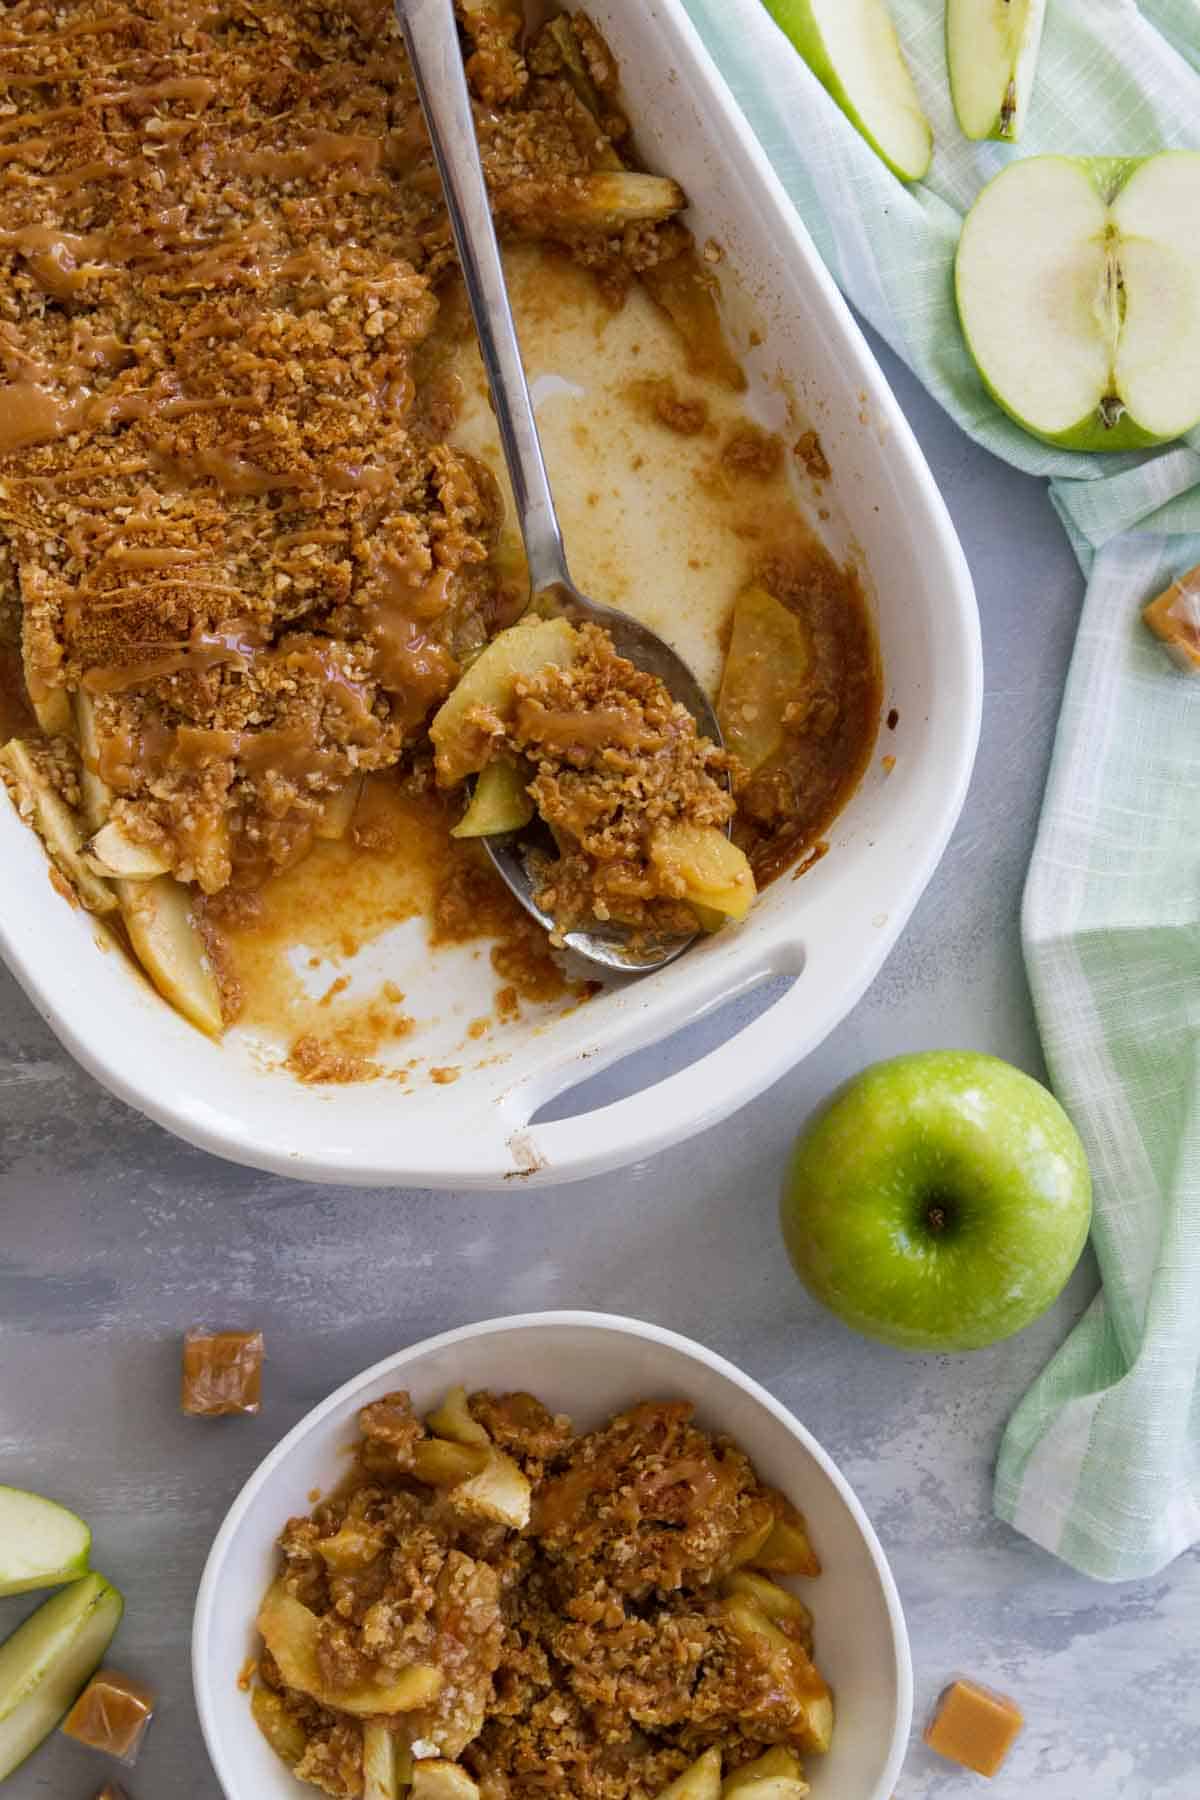 Baking dish of caramel apple crisp with a serving spoon.